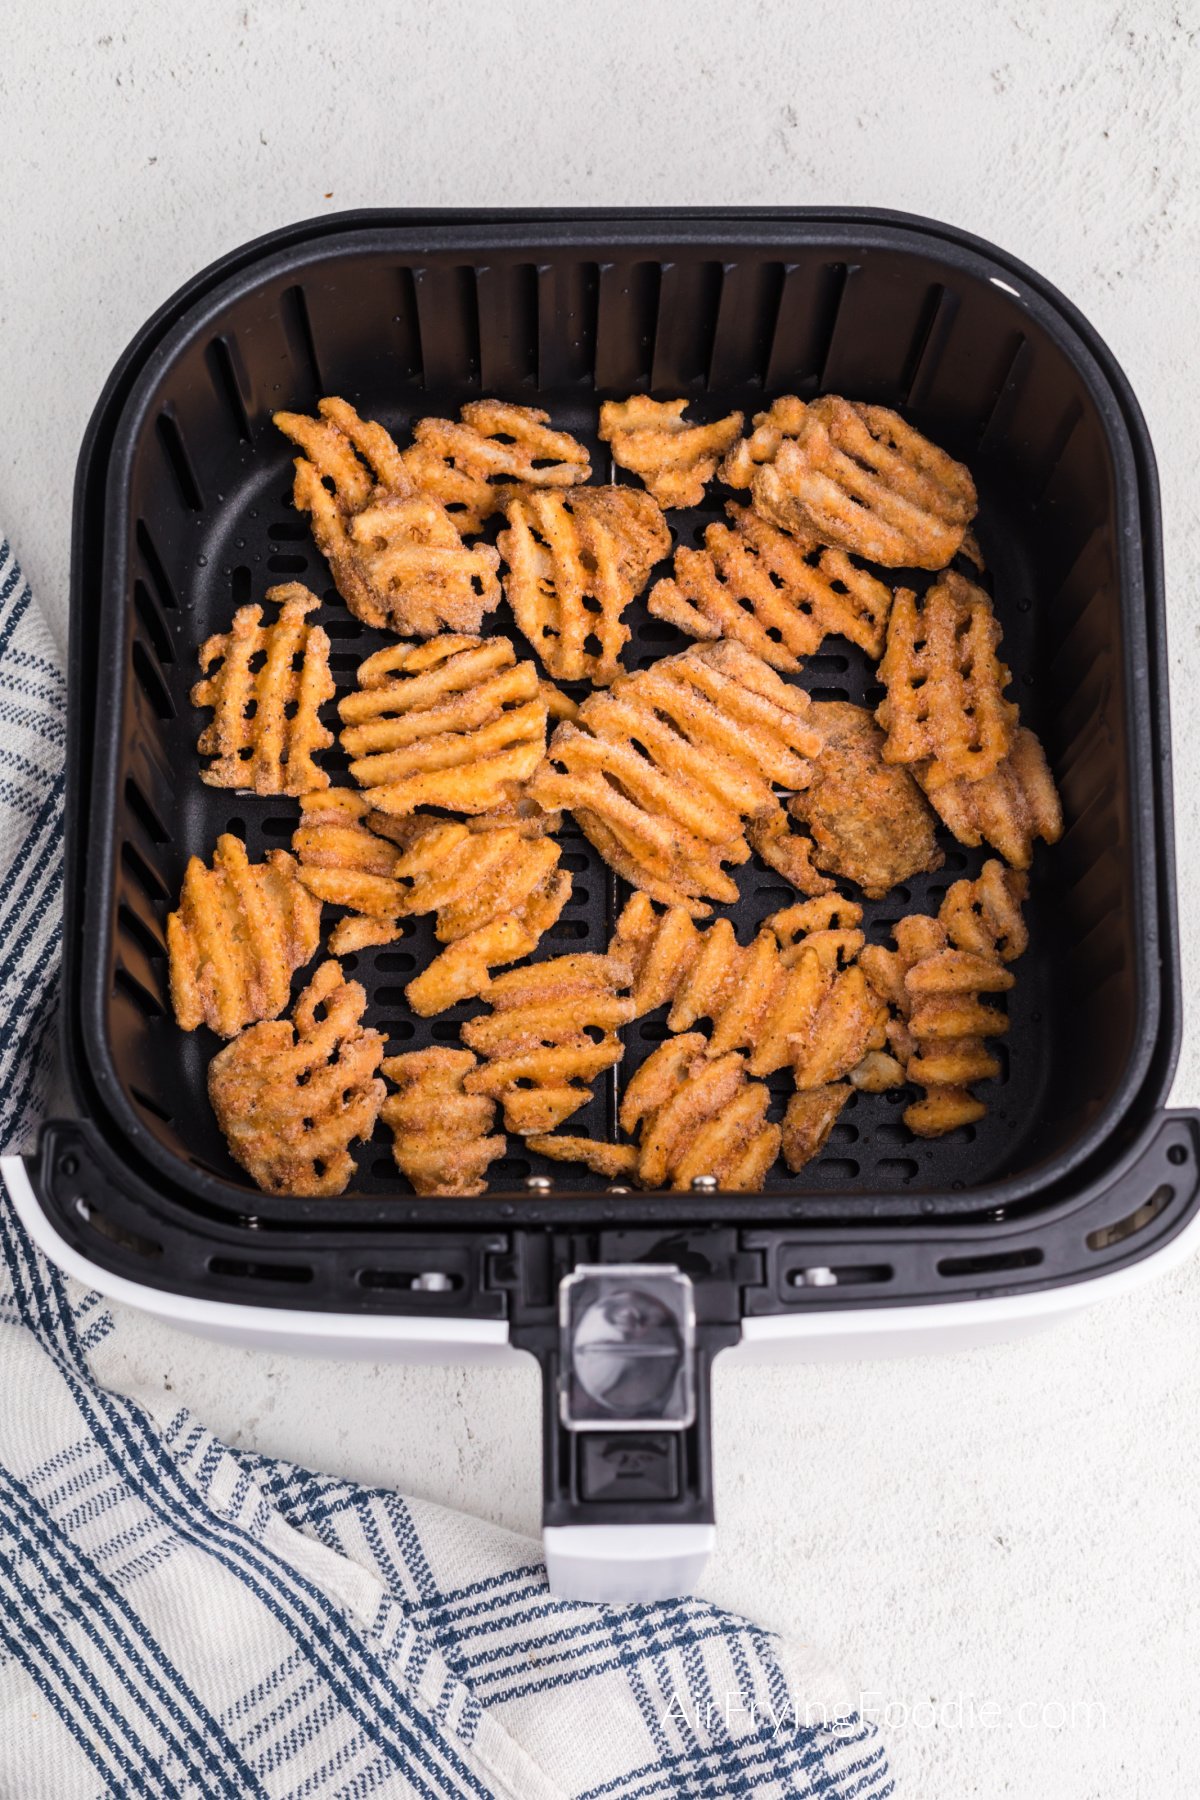 frozen waffle fries in the basket of the air fryer.